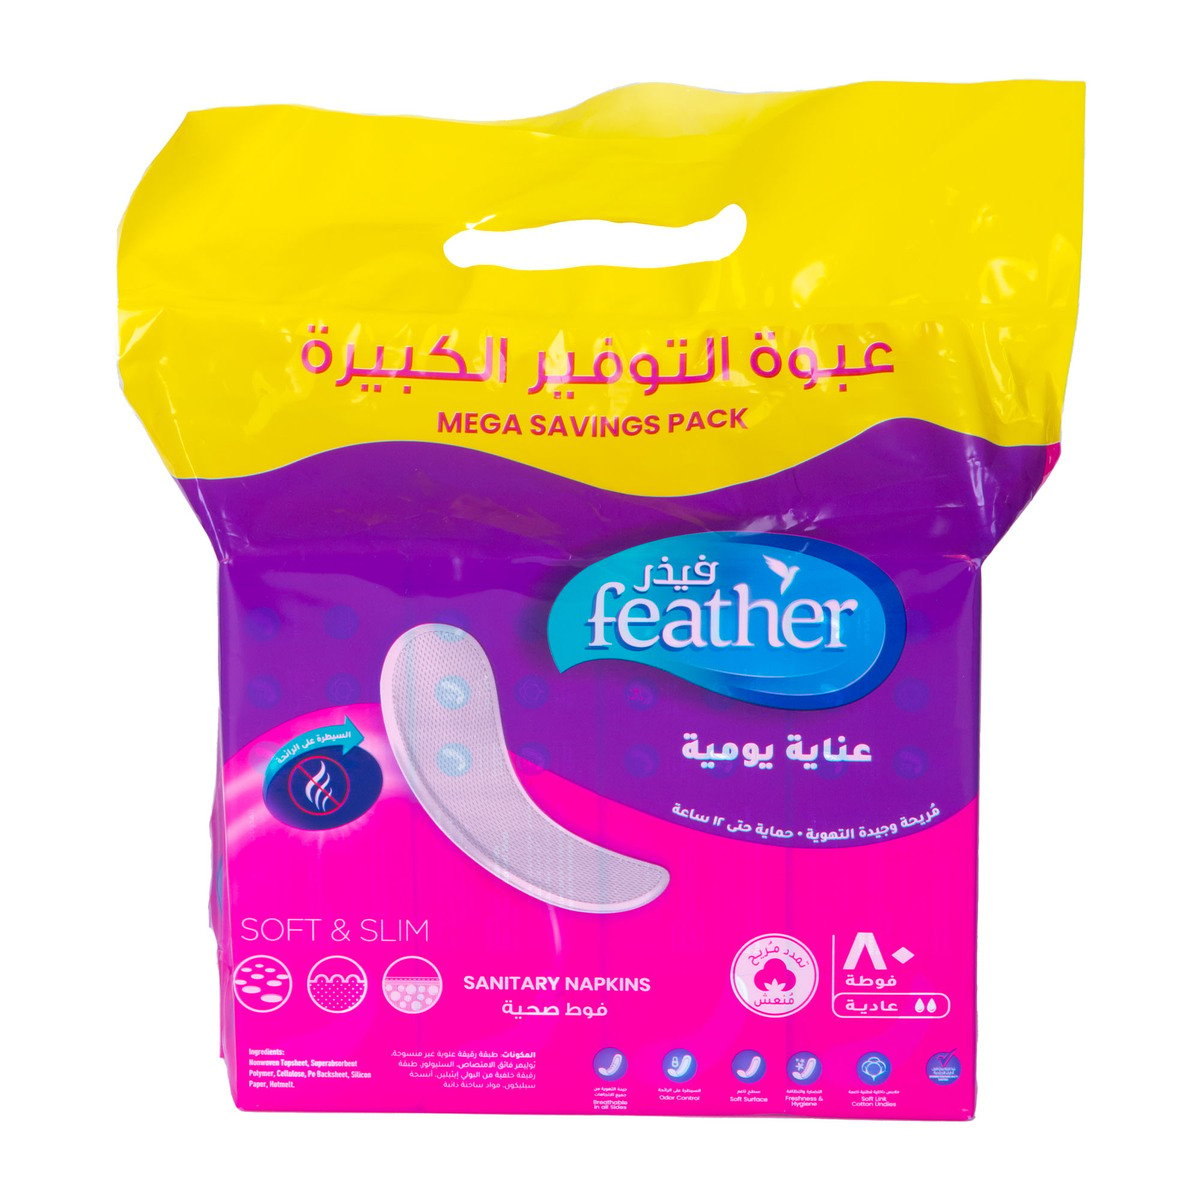 Feather Daily Care Pantyliner 80 pcs